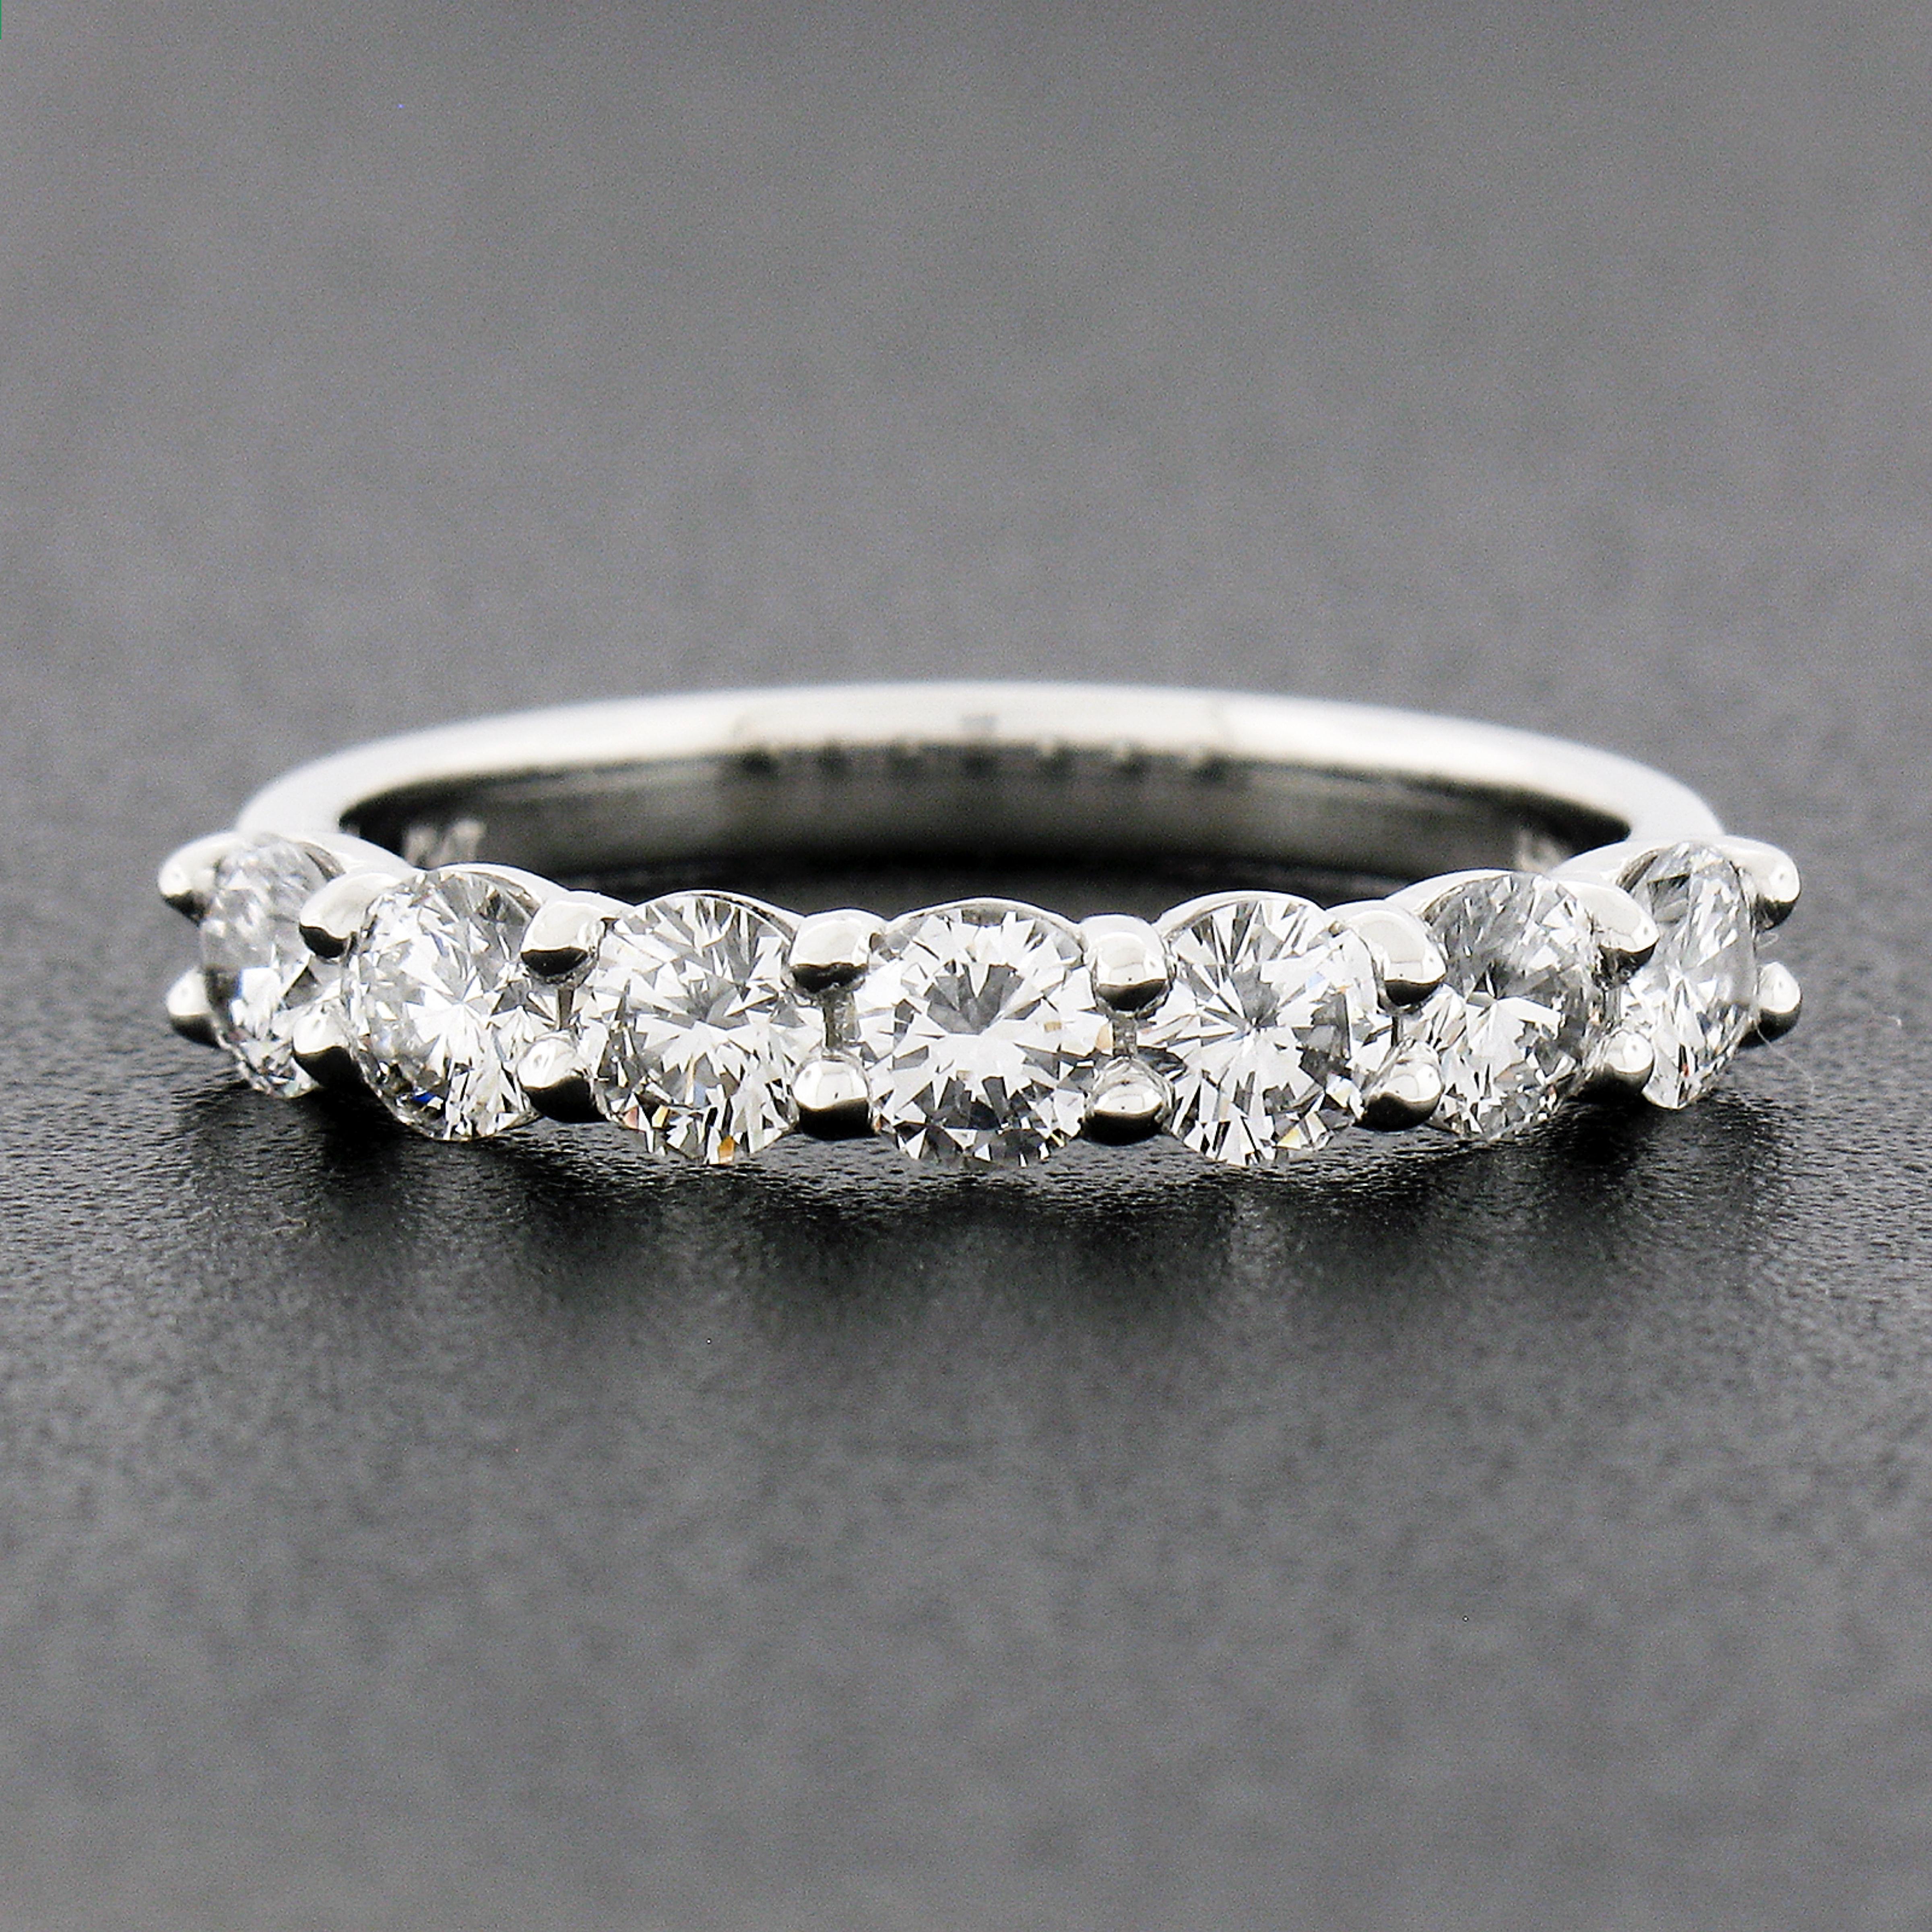 This classic and stunning diamond band ring is newly crafted from solid platinum and features 7 round brilliant cut diamonds neatly shared-prong set across its top. The diamonds weigh exactly 1.12 carats total, with each showing a nice large size,